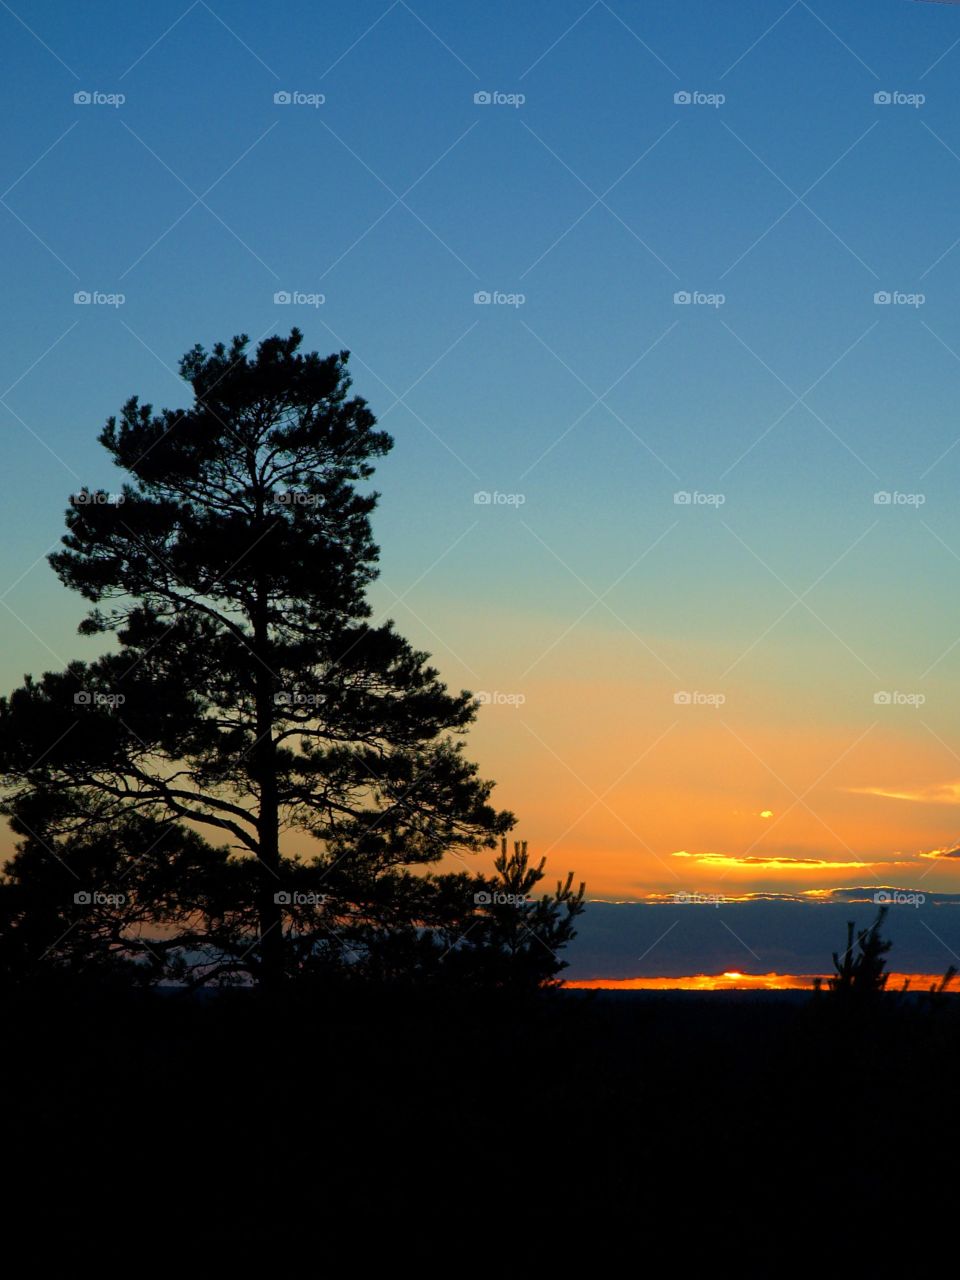 Sunset behind the silhouette of a pine tree.